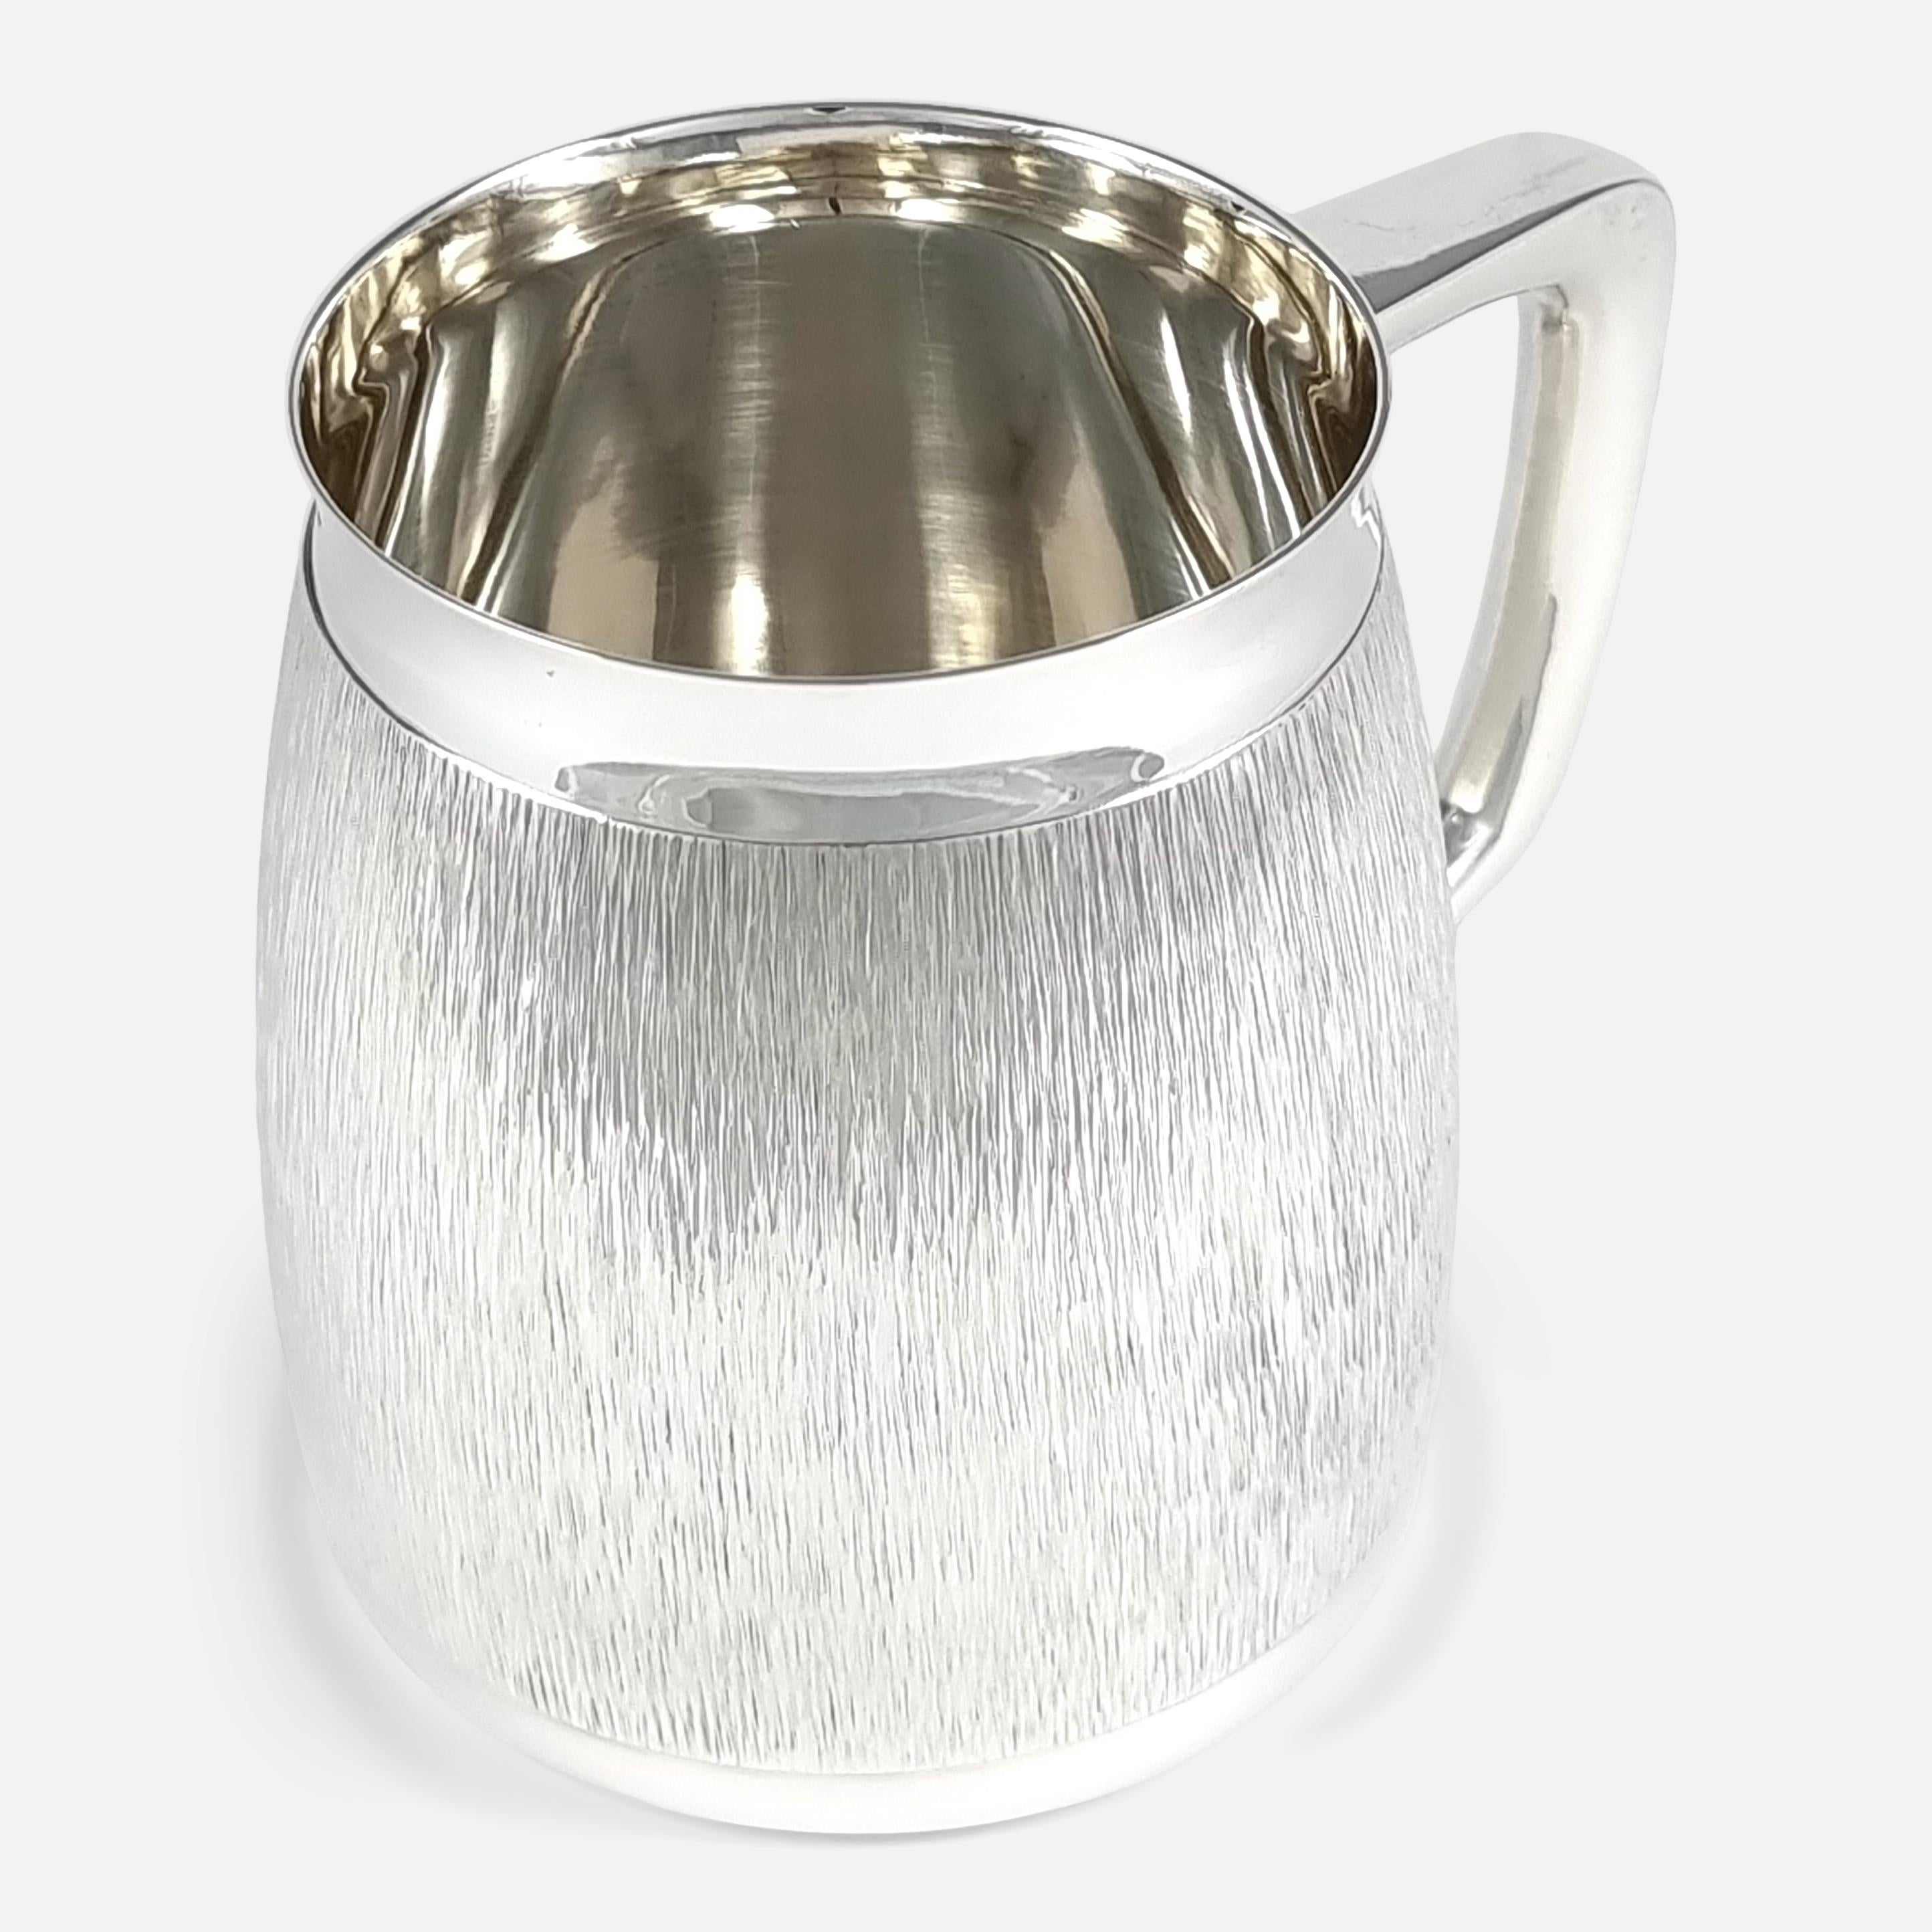 Sterling Silver Mug, C. J. Vander, London, 1976 In Good Condition For Sale In Glasgow, GB